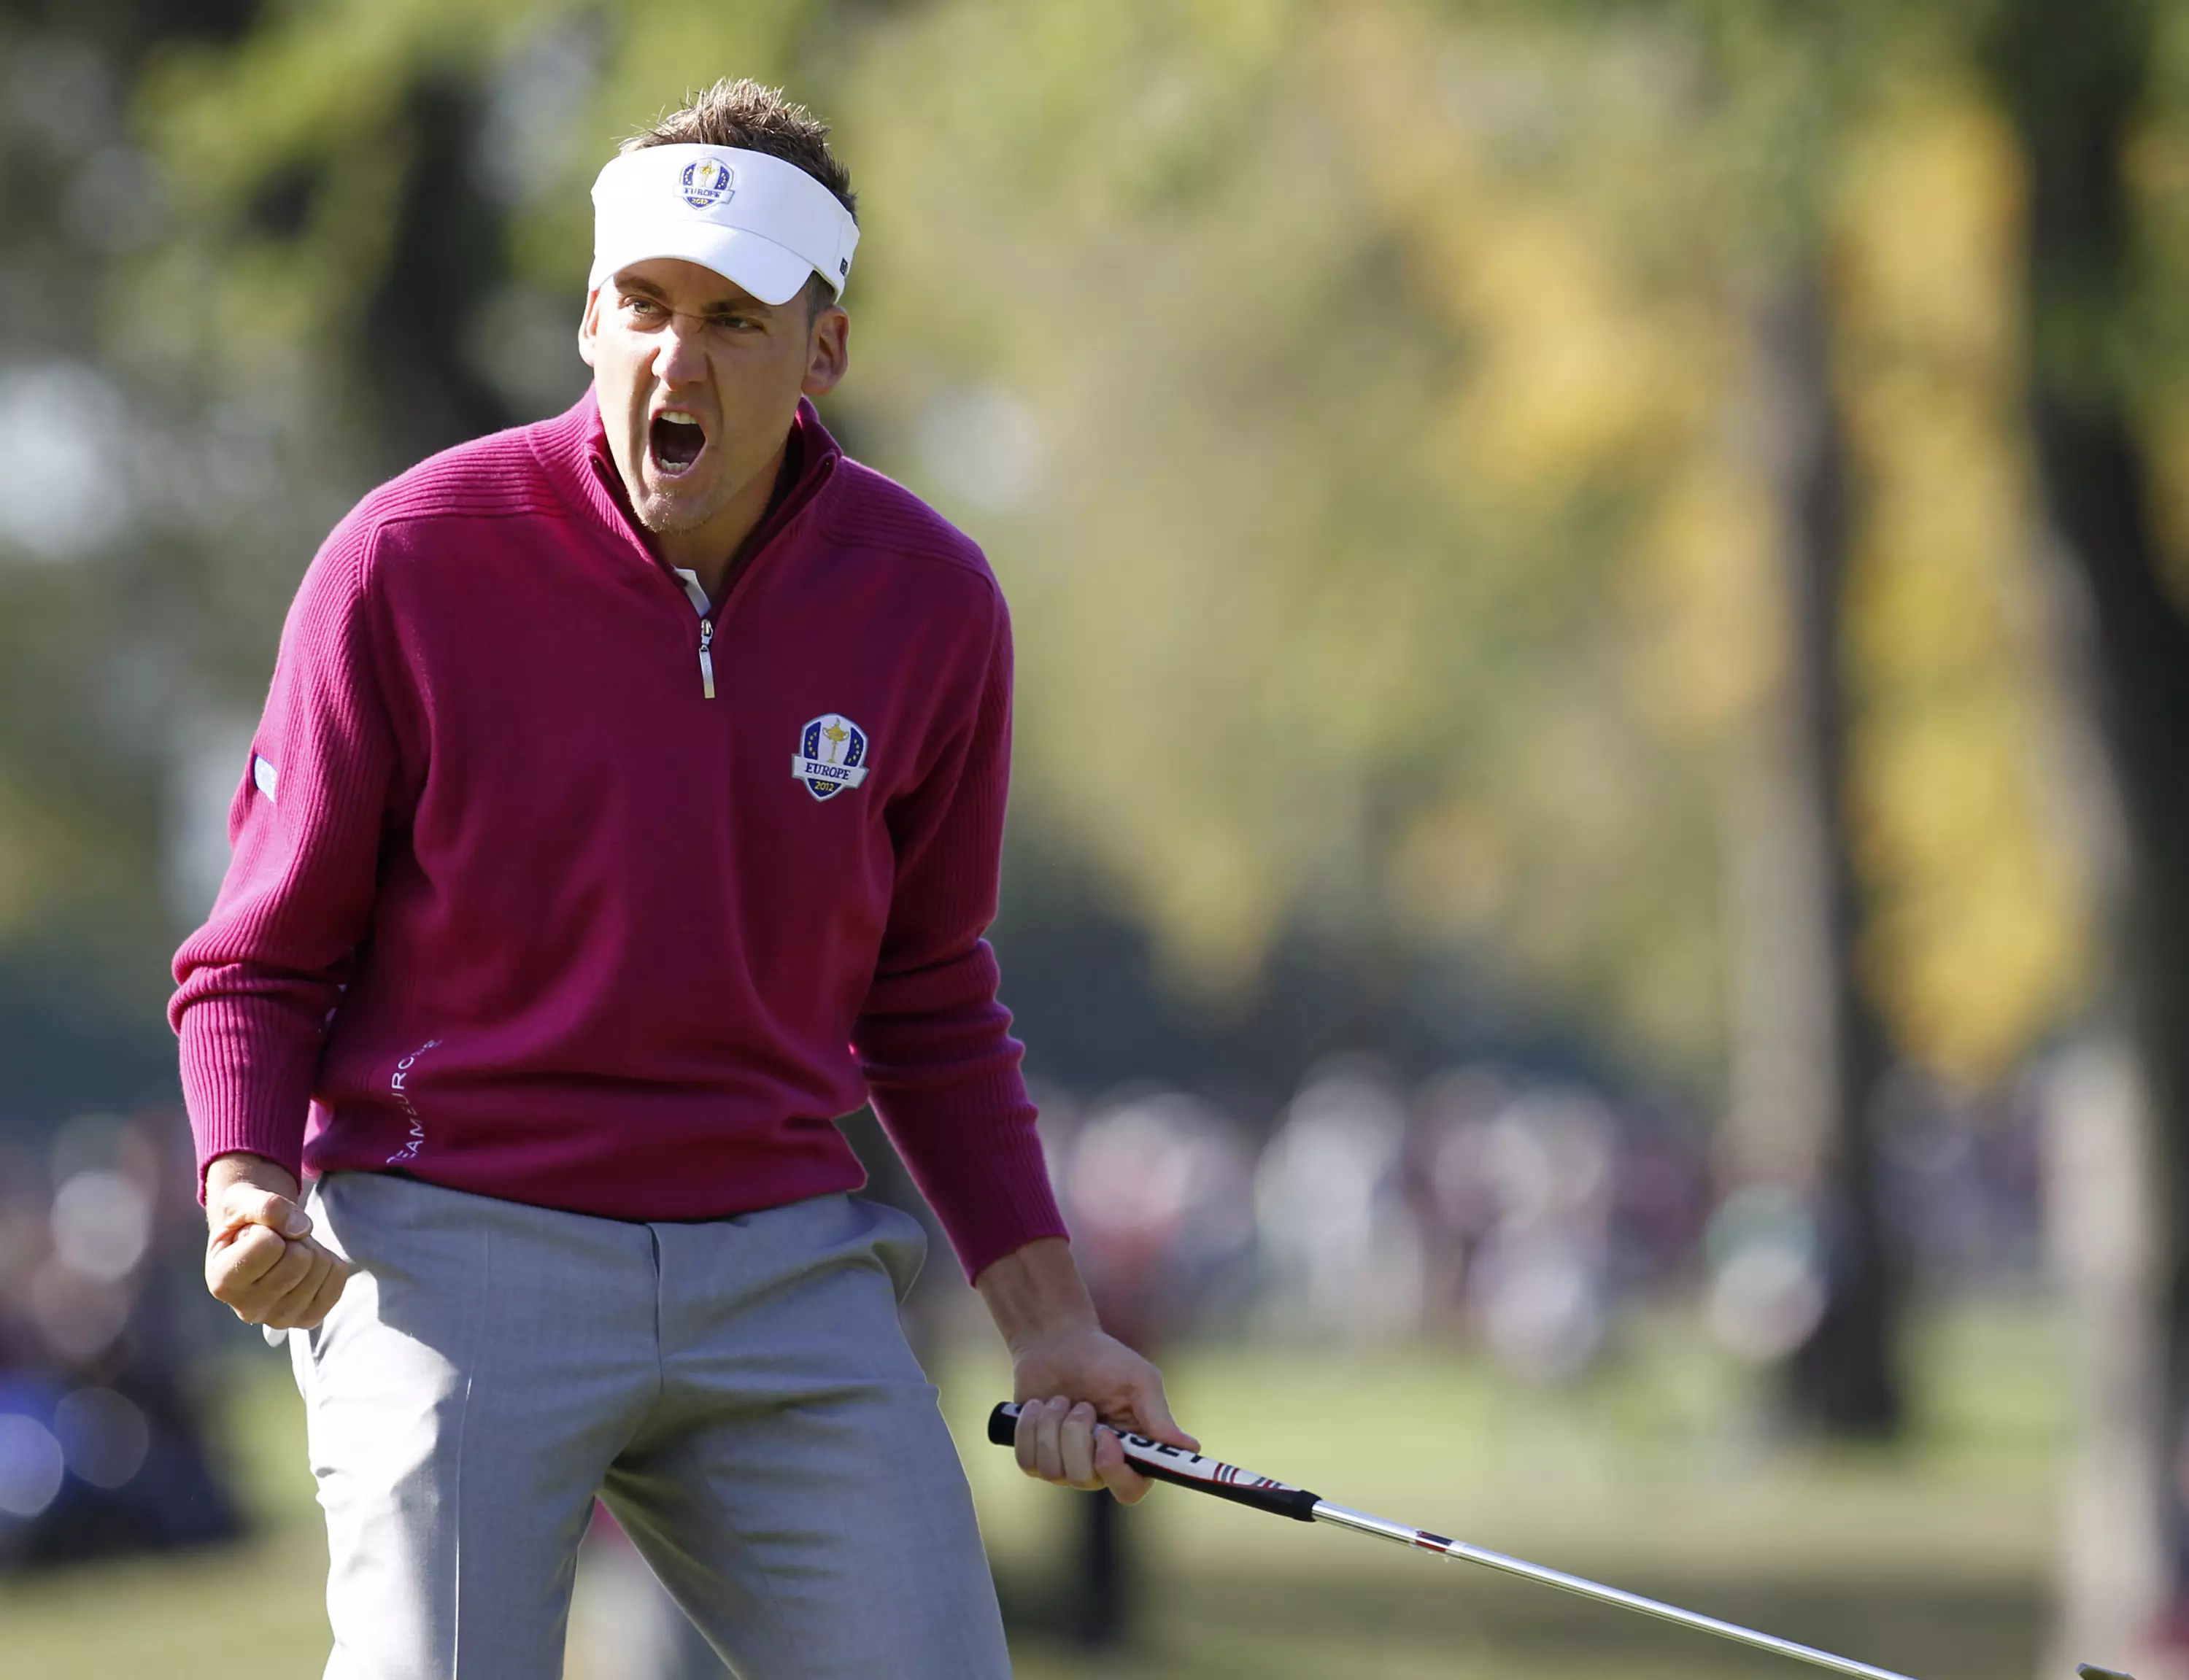 Poulter's roar was iconic during Europe's comeback. Image: PA Images